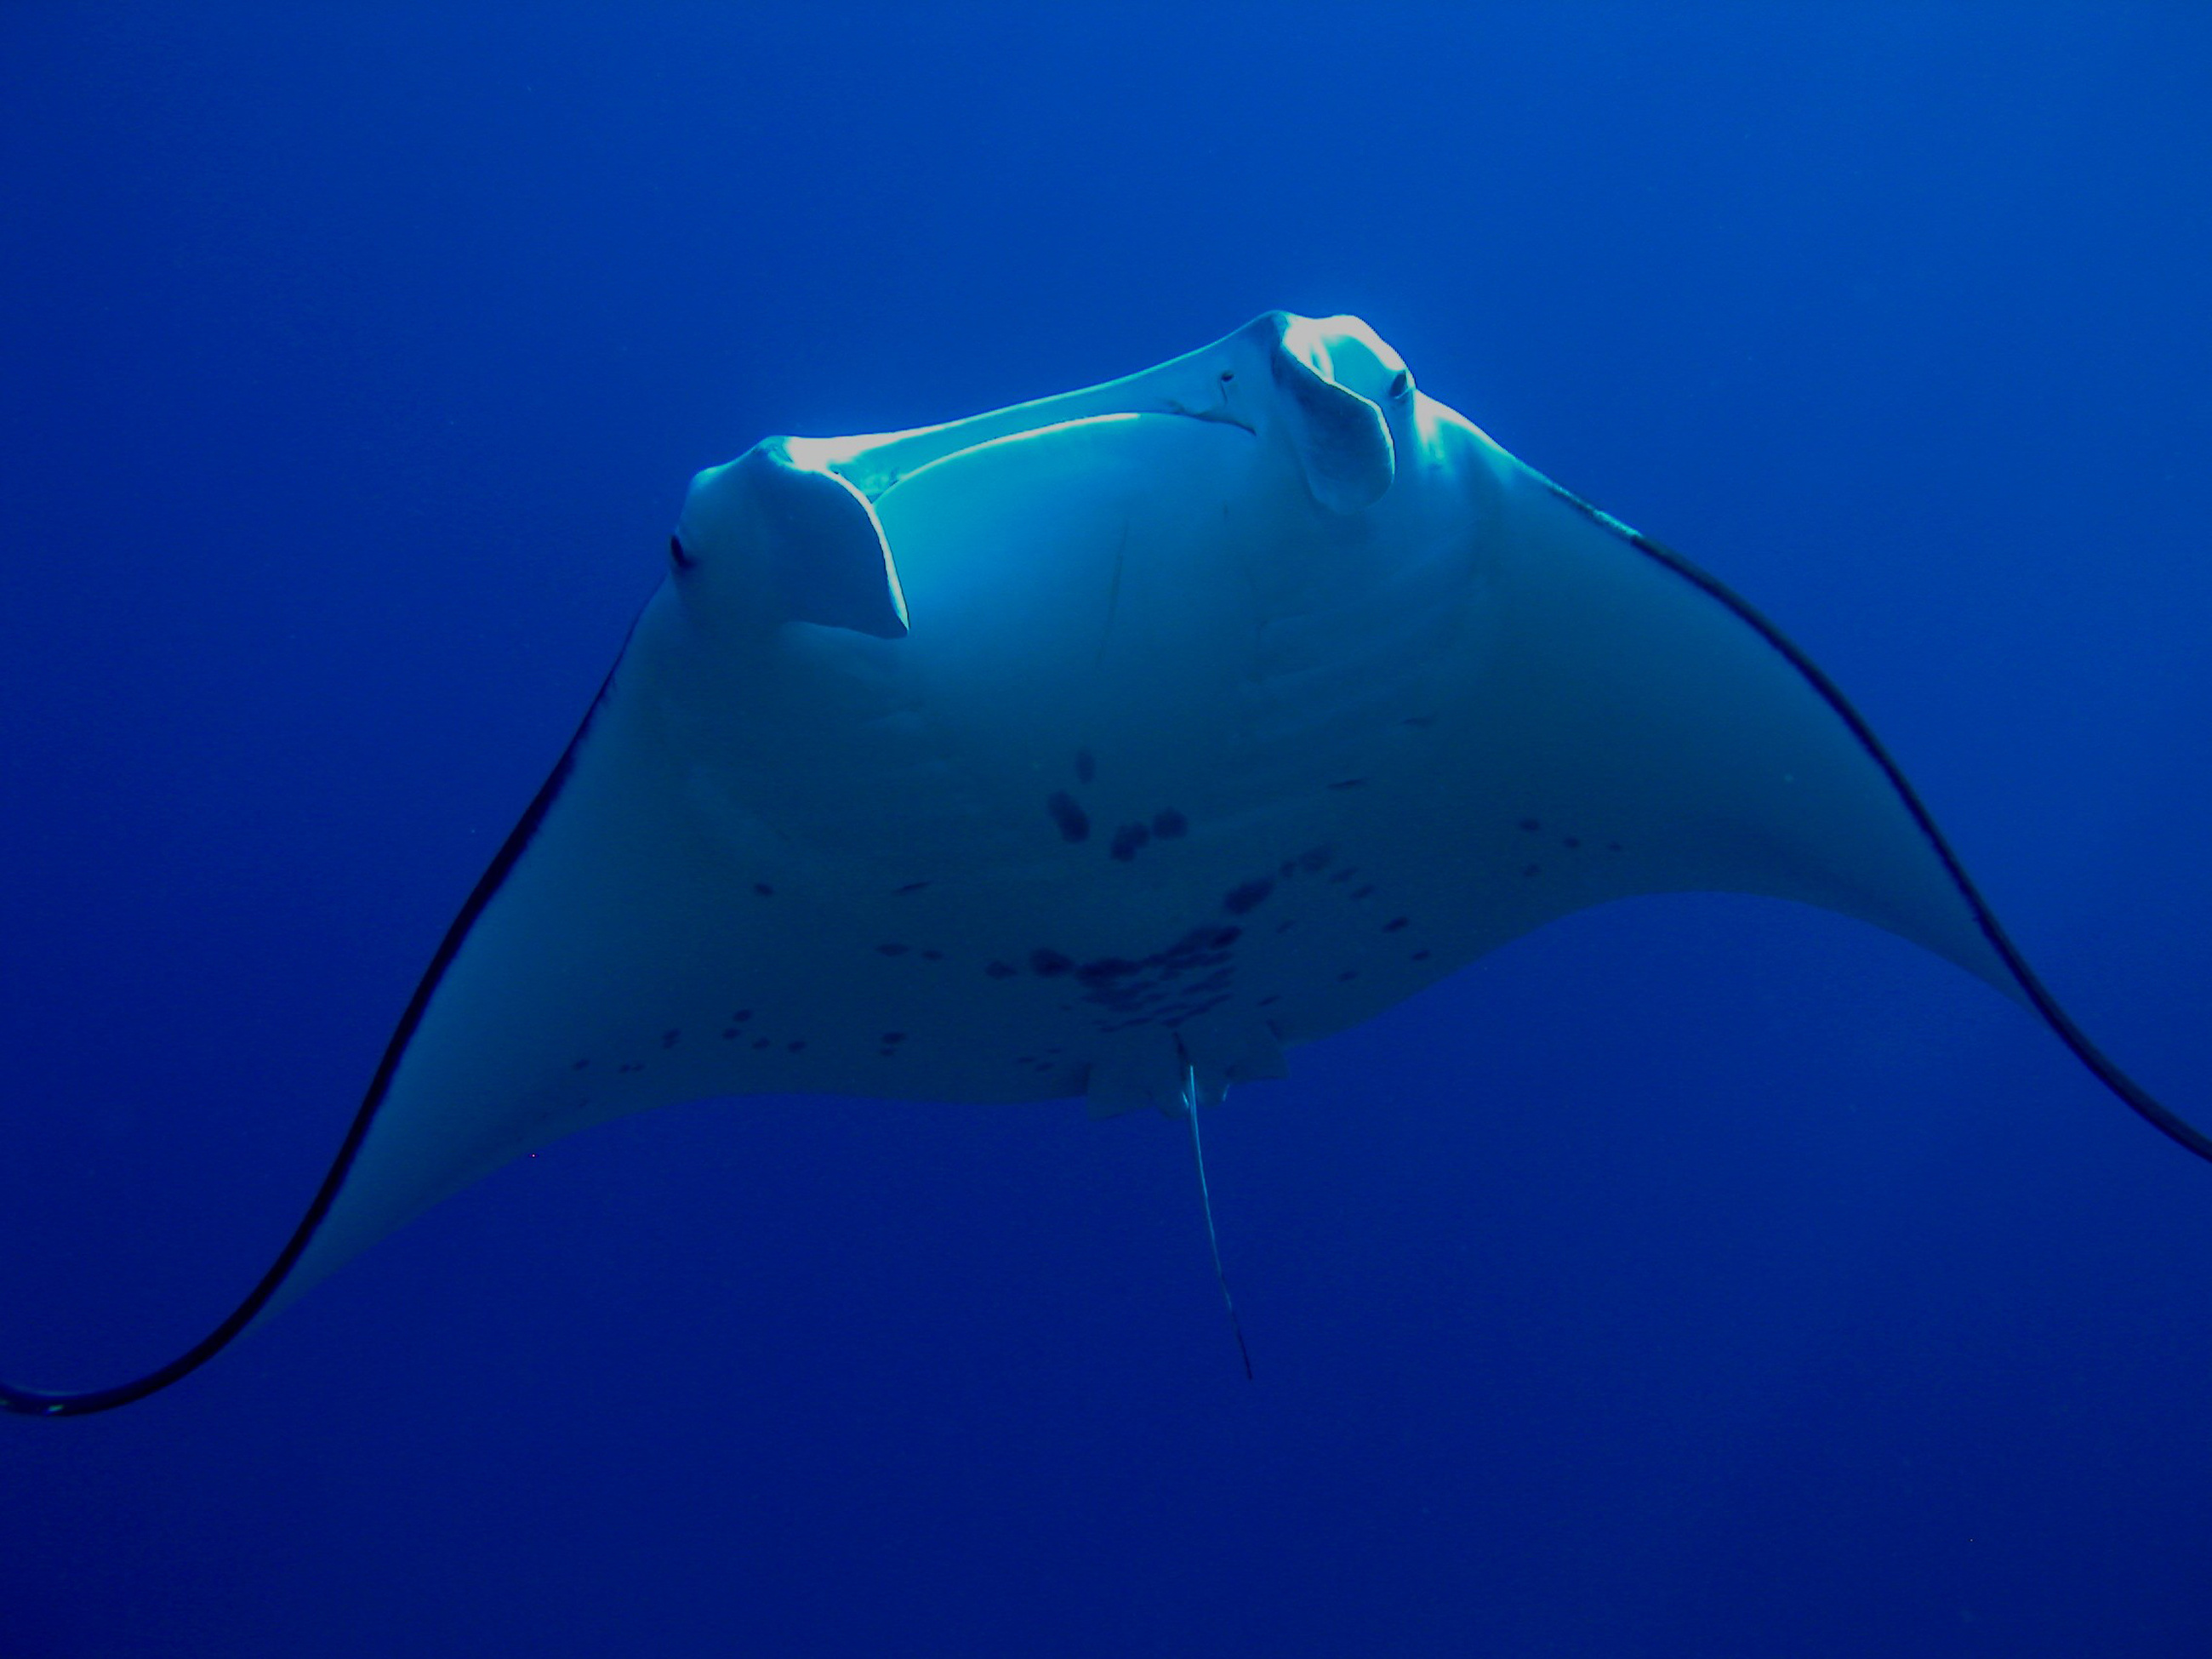 Large manta ray encountered at Gotham City dive site in Australia